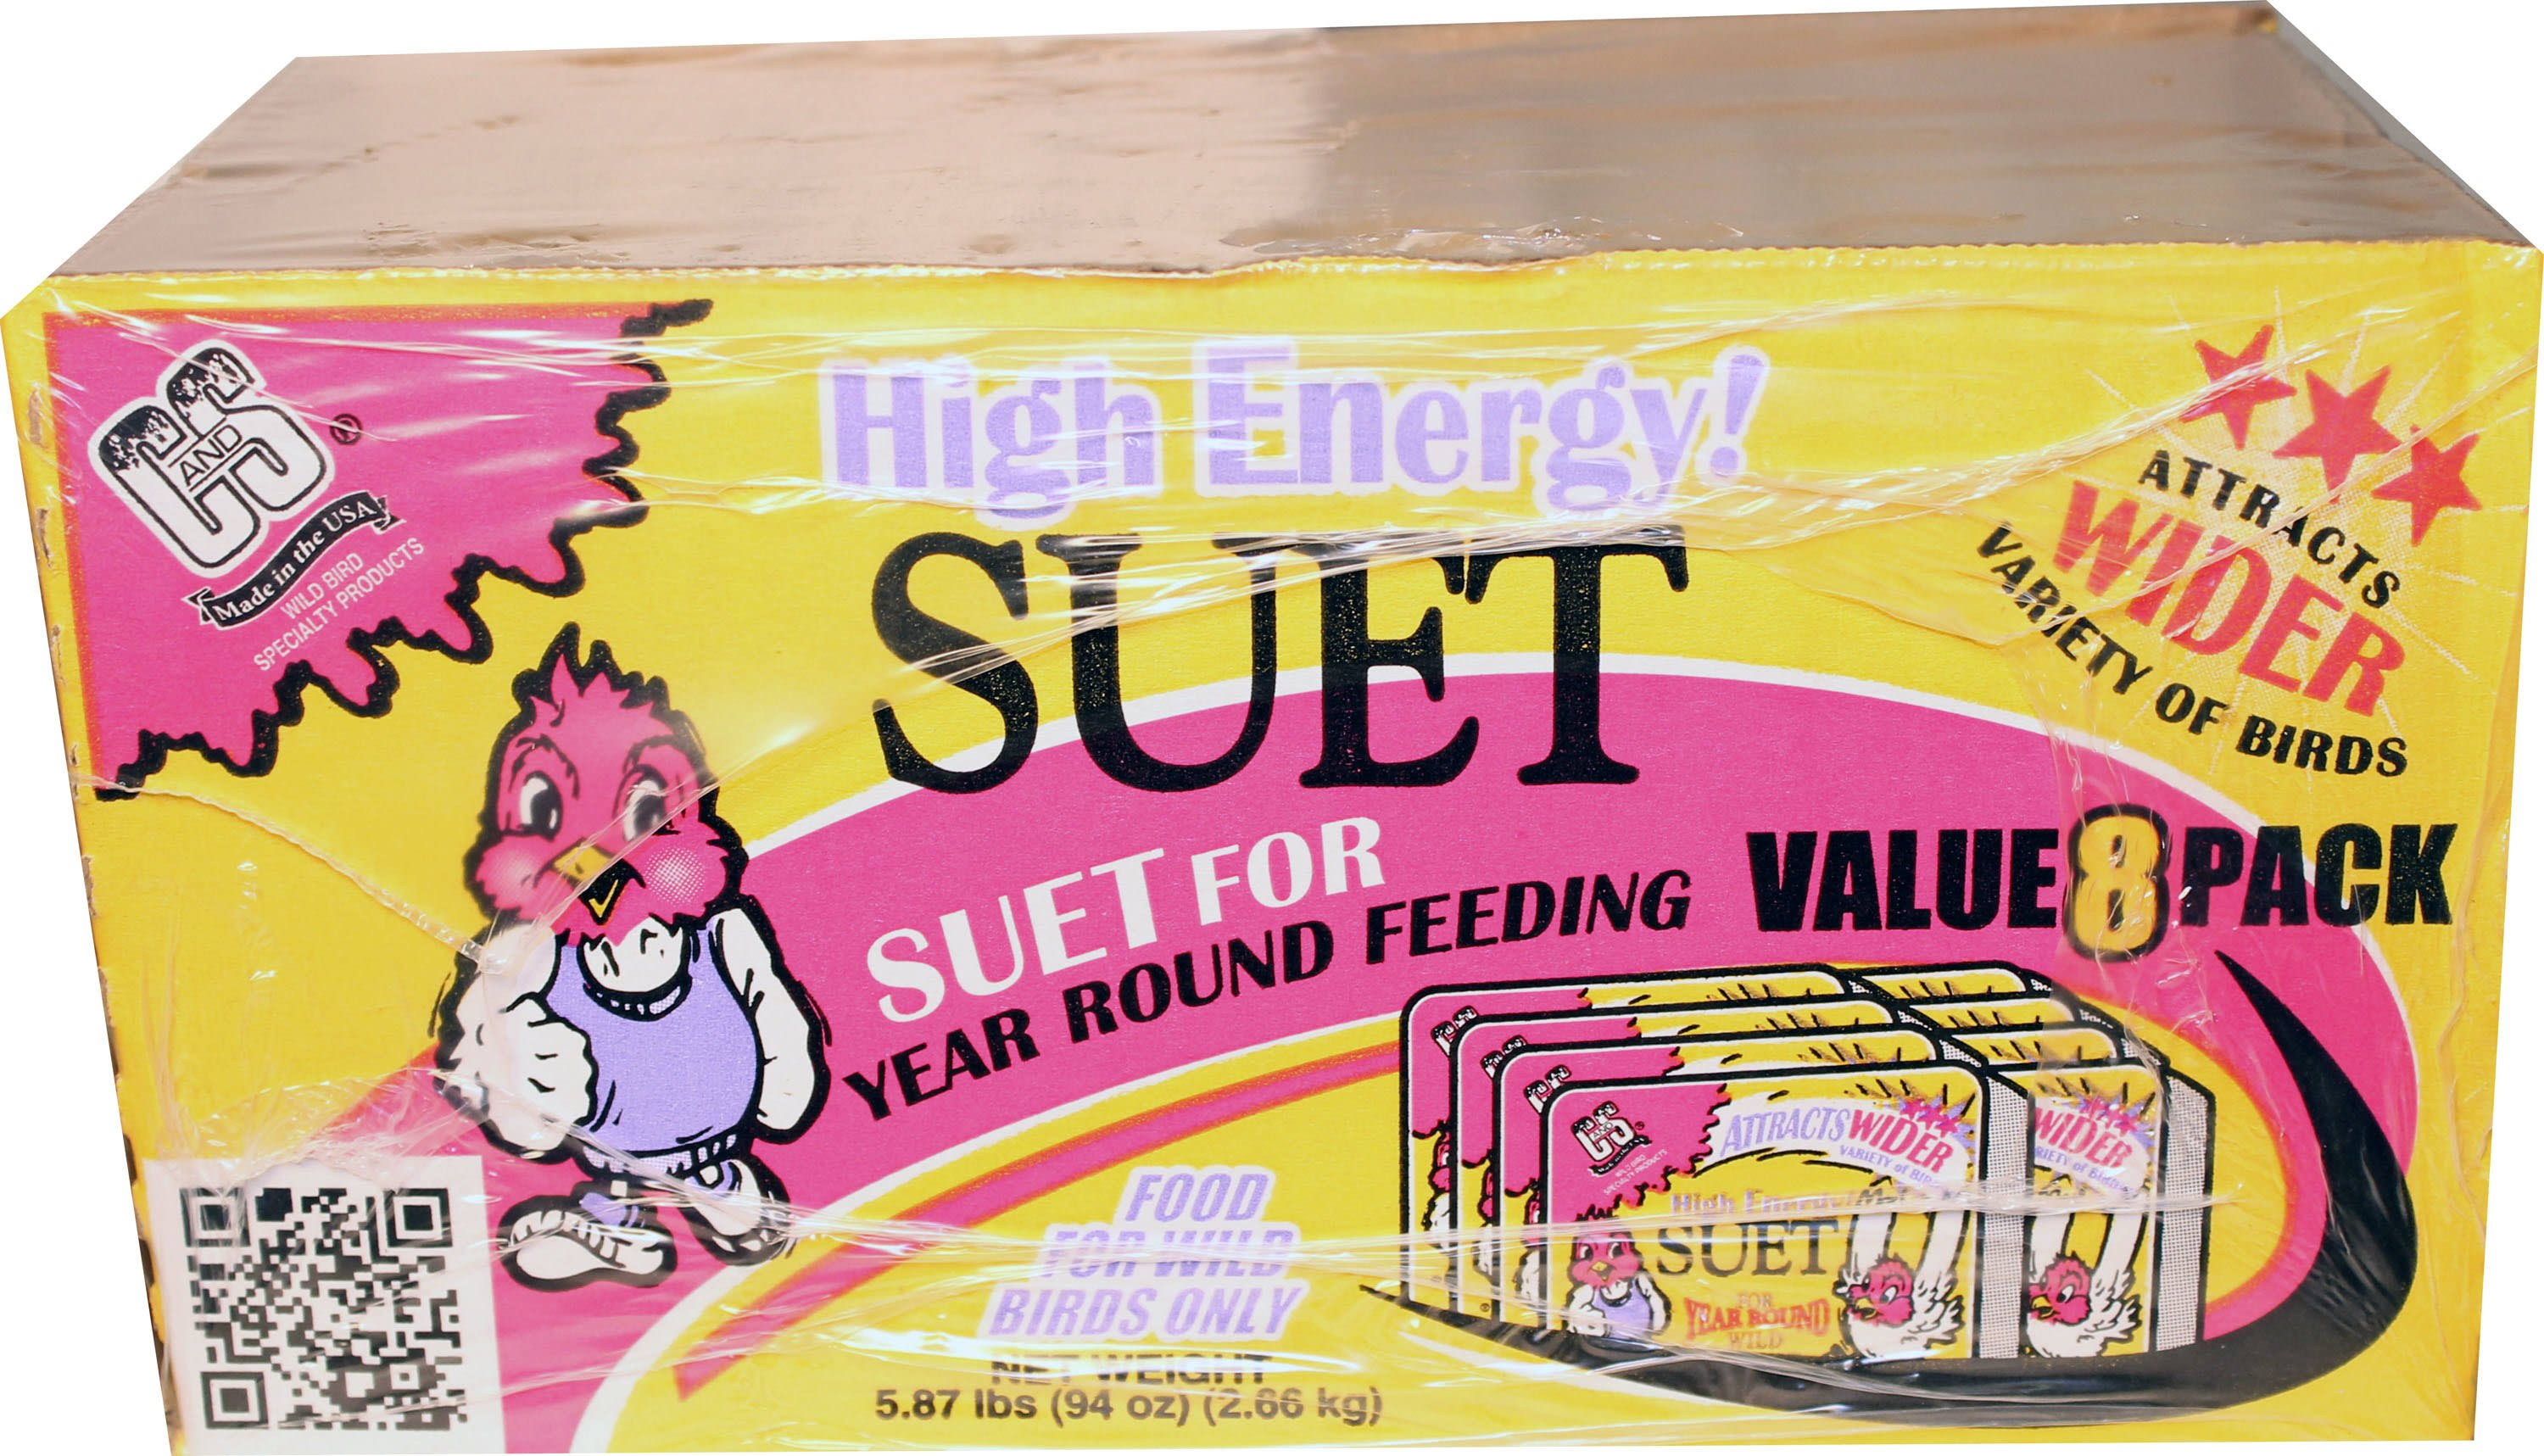 C & S High Energy Suet Value Pack | Delivery guaranteed | 30 Day Money Back Guarantee | Free Shipping On All Orders